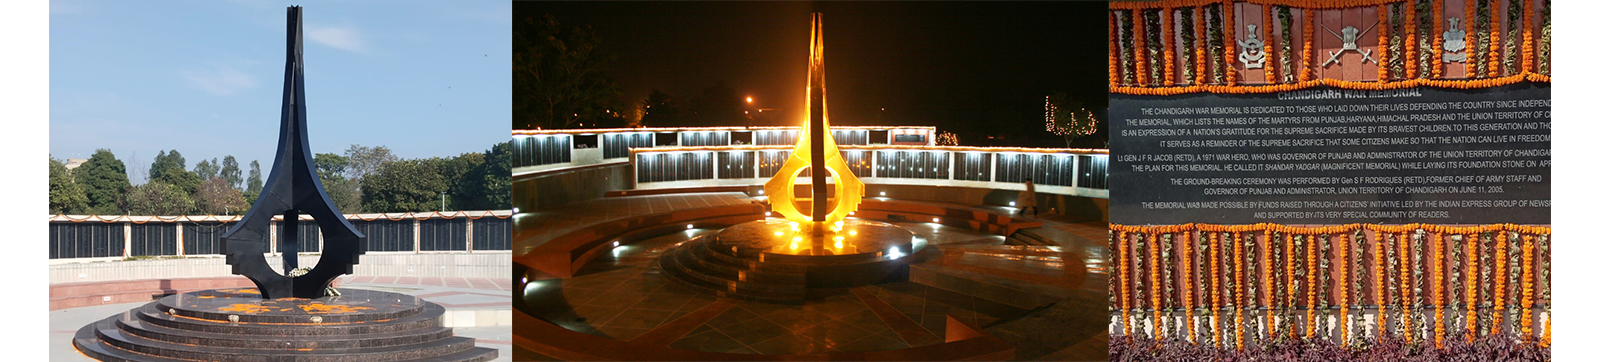 Chandigarh War Memorial, the First of its Kind Post-Independence Era Monument in the Country